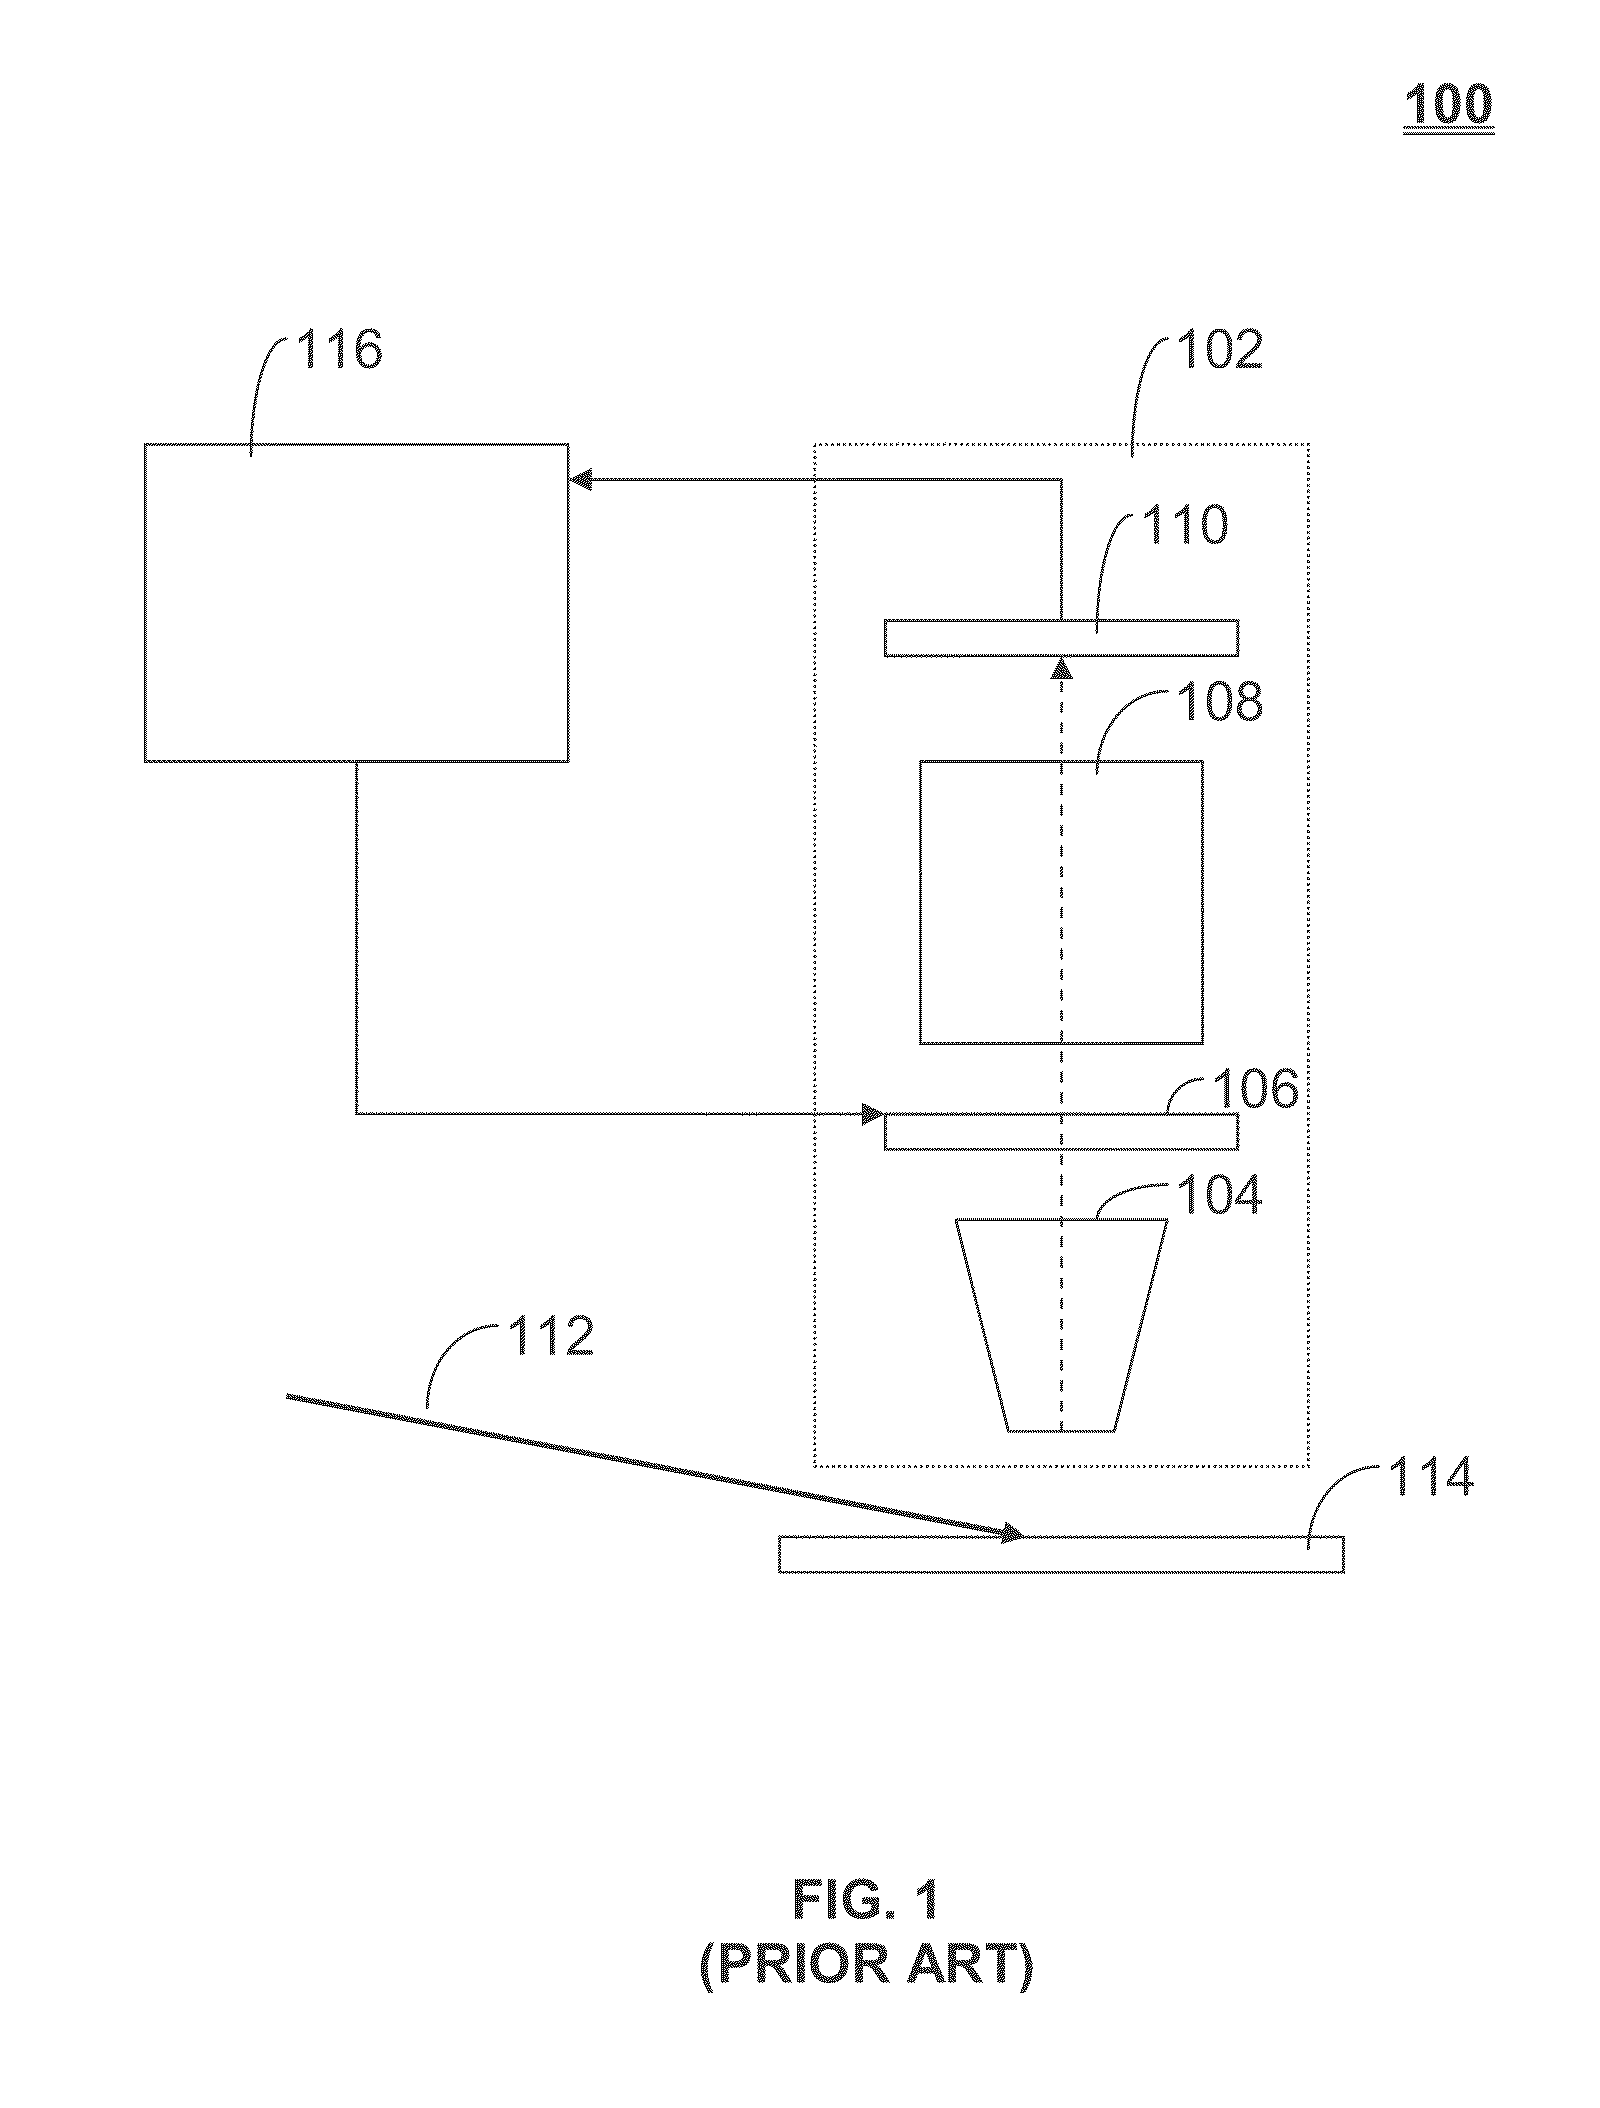 Reticle Inspection Systems and Method